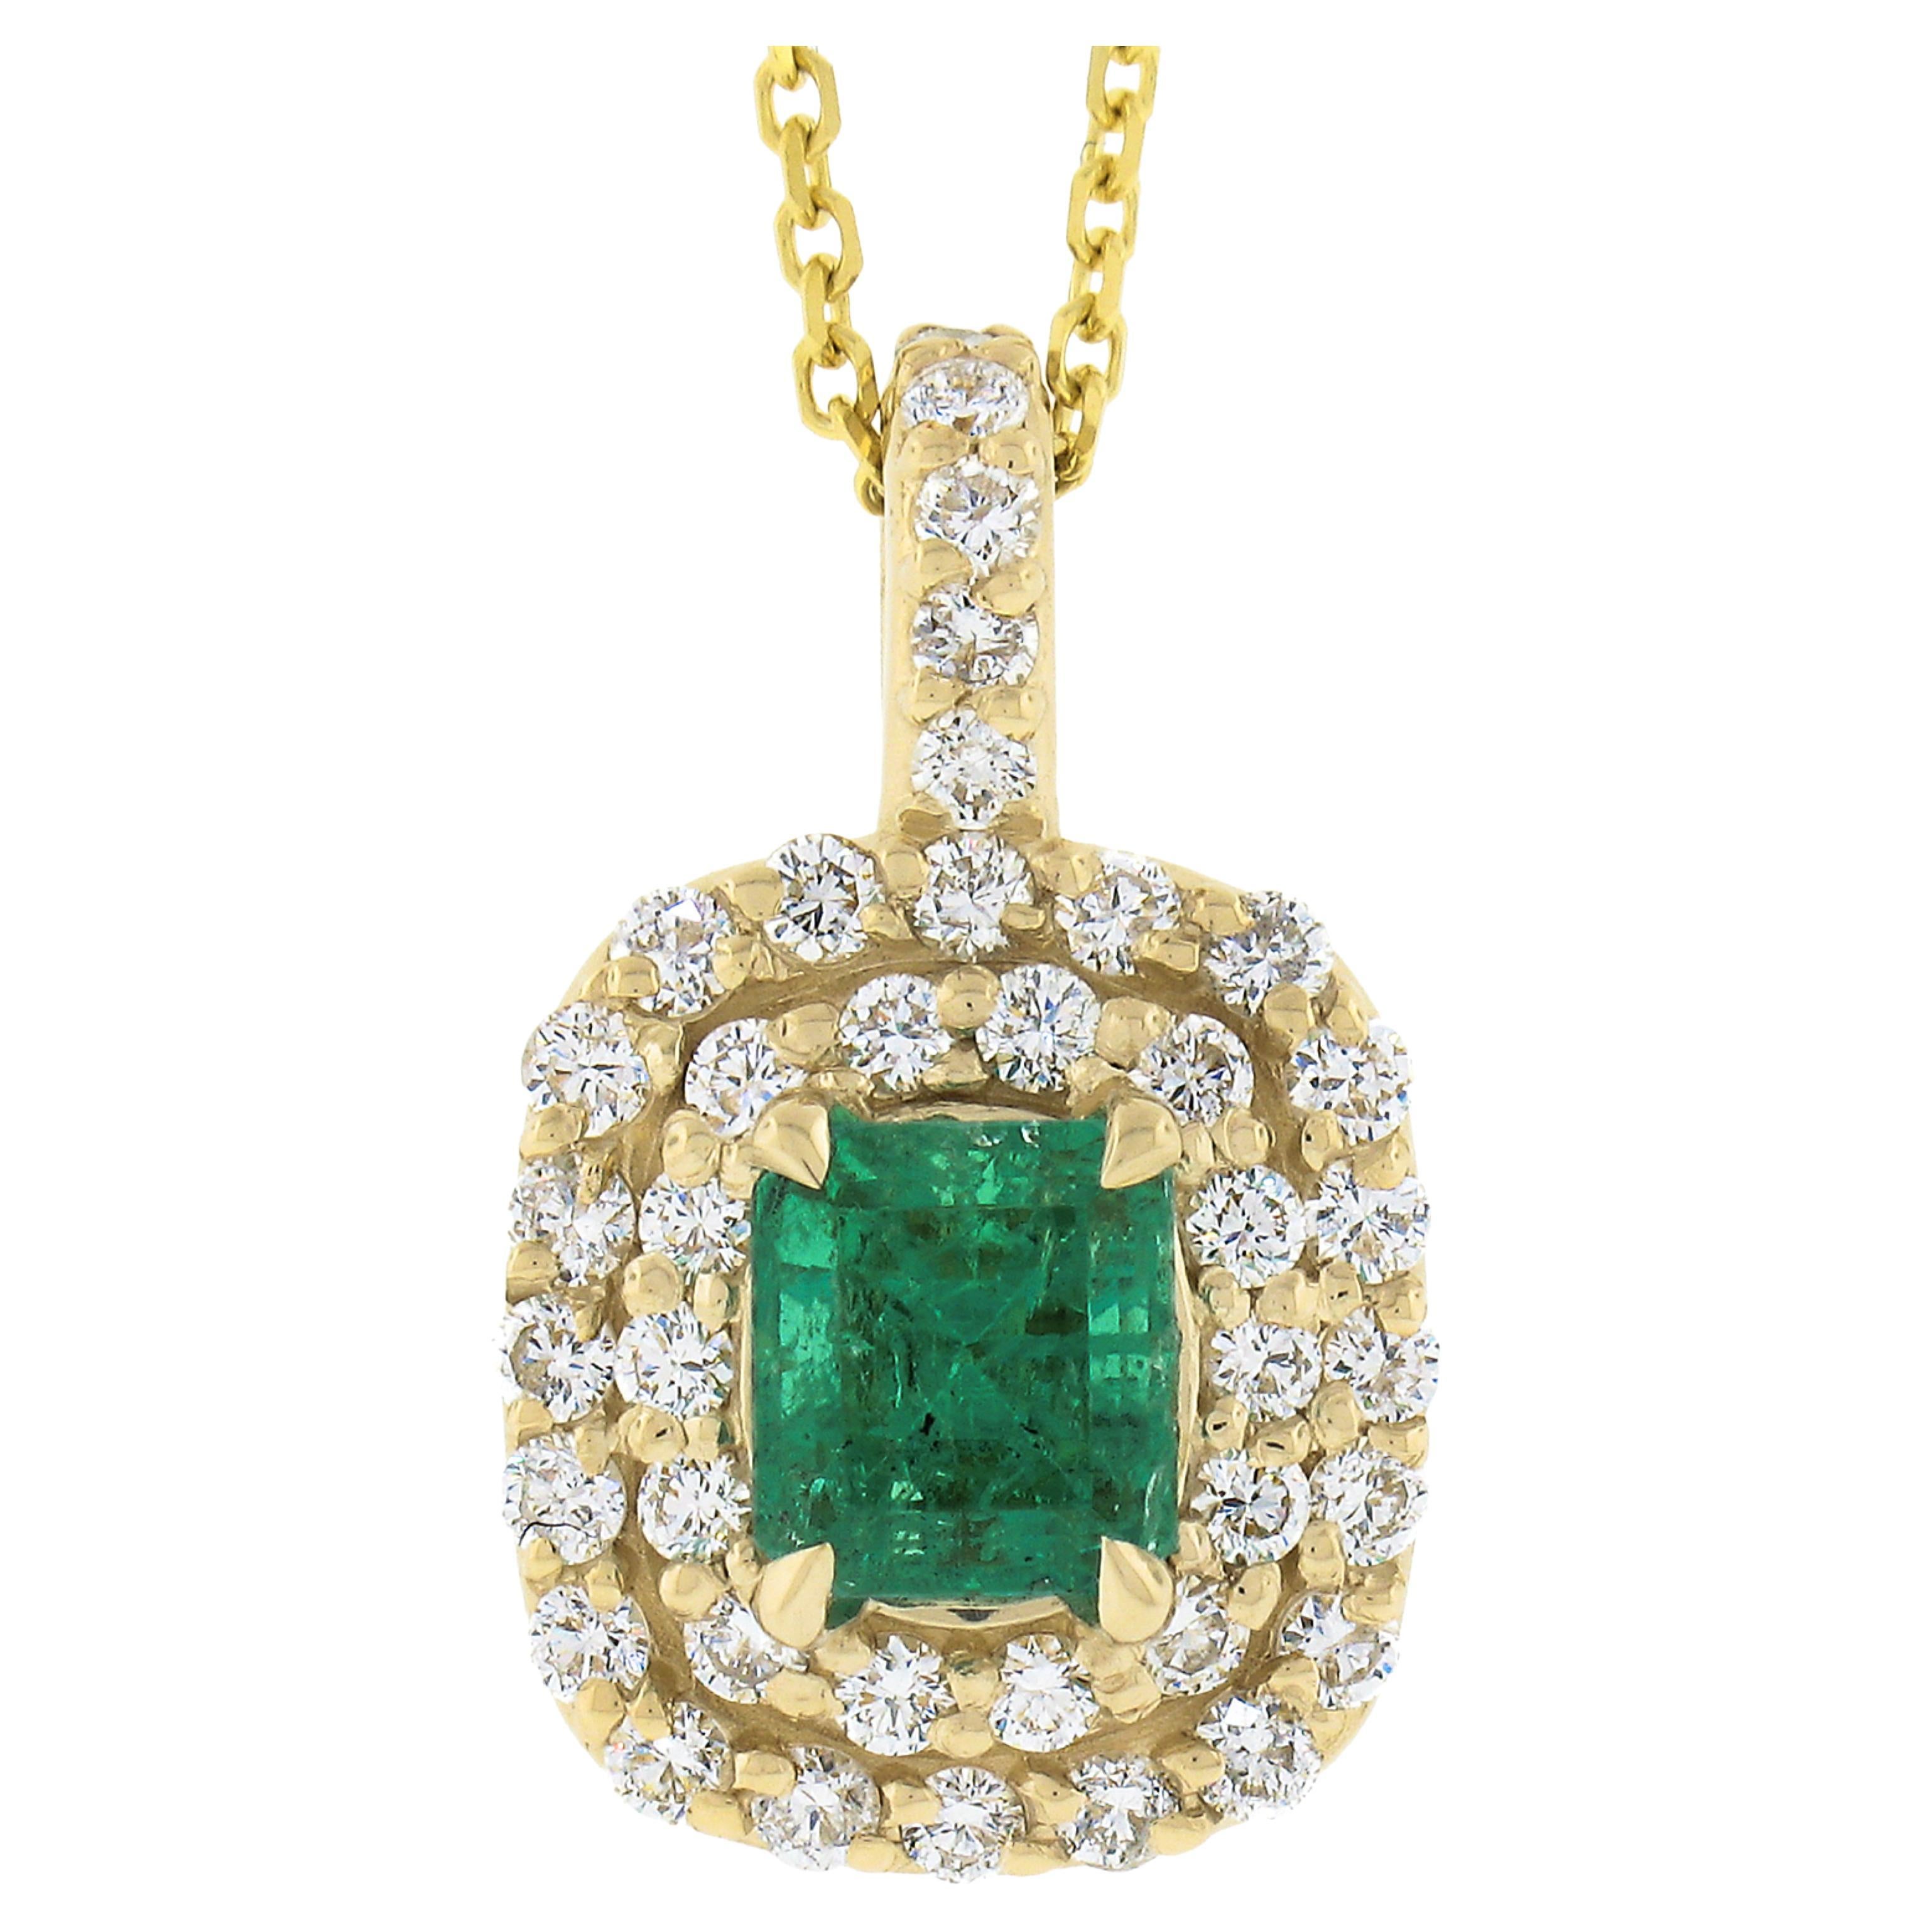 New 14k Gold 1.36ctw Gia Colombian Emerald & Dual Diamond Halo Pendant Necklace